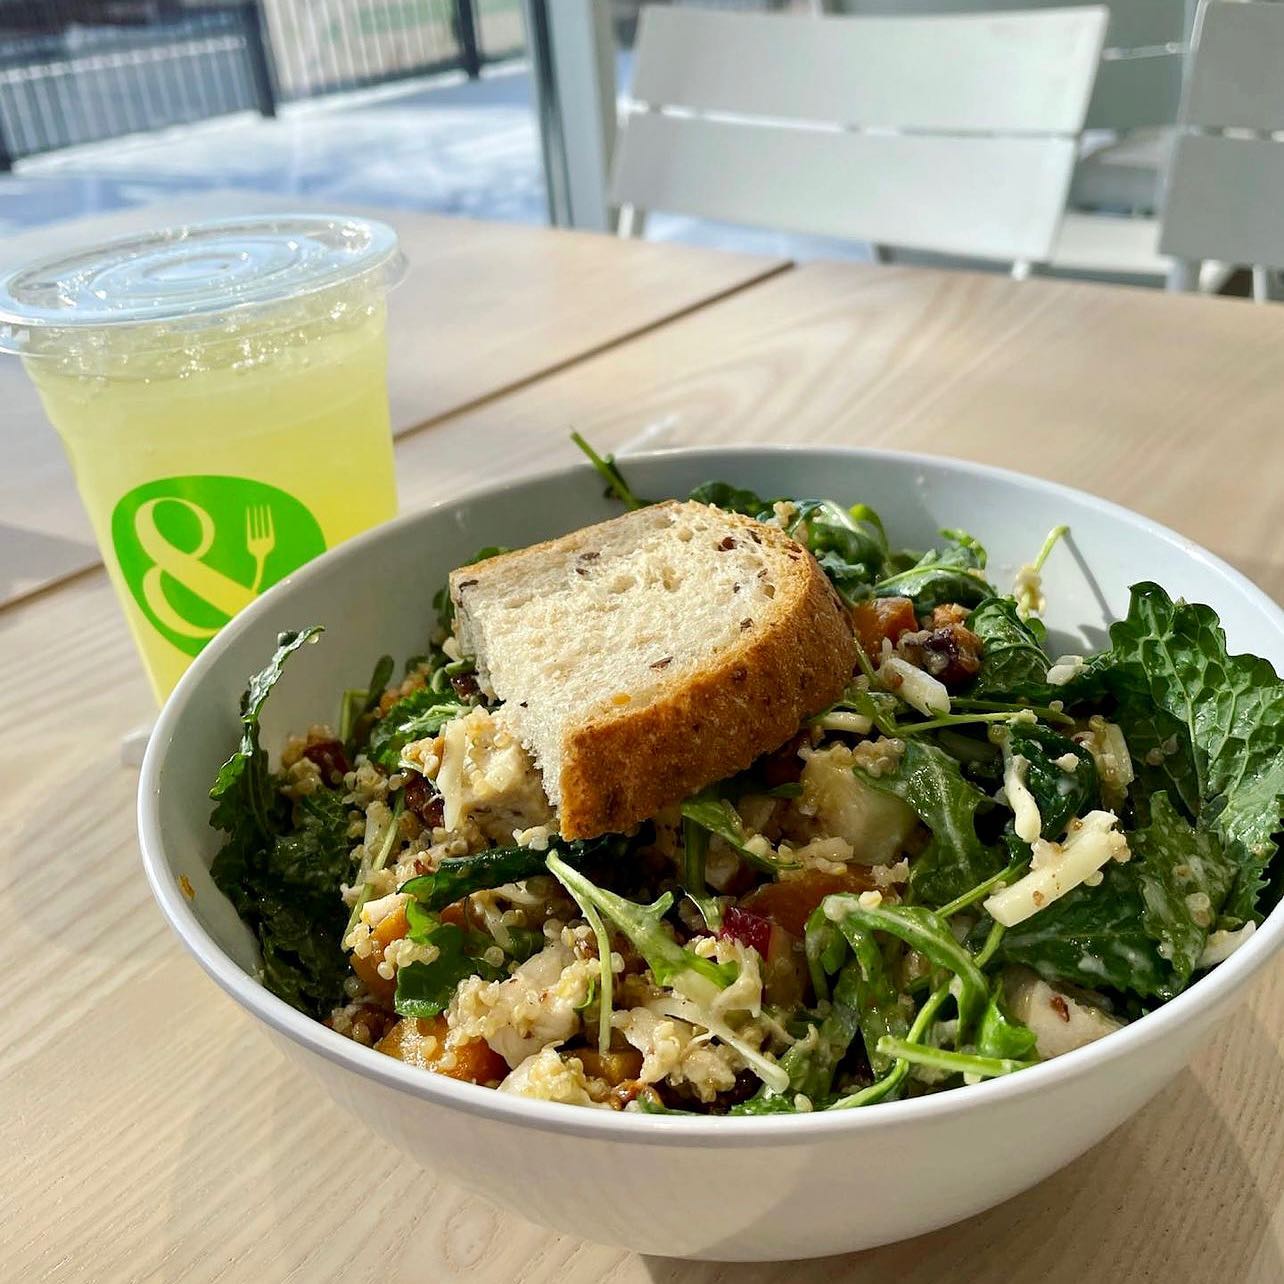 A salad with quinoa and a baguette slice on top sit on a brightly lit table next to a lemonade donning the Crisp and Green logo